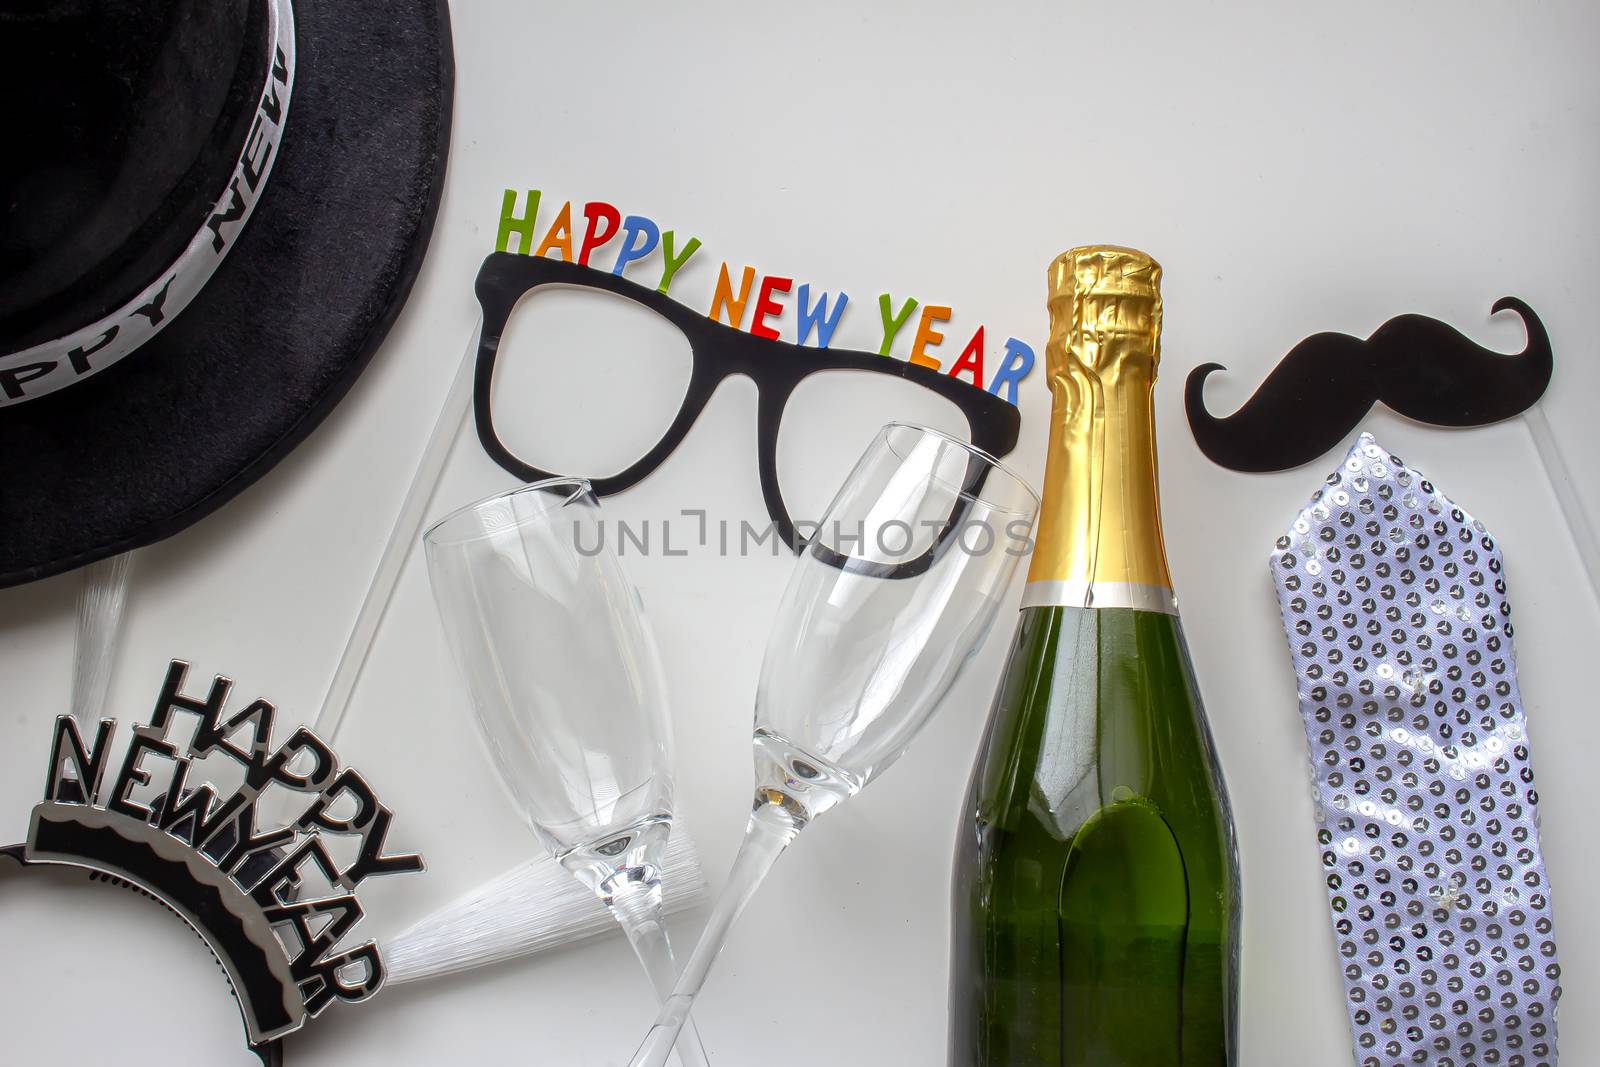 Happy New Year ornaments with champagne and cups by oasisamuel